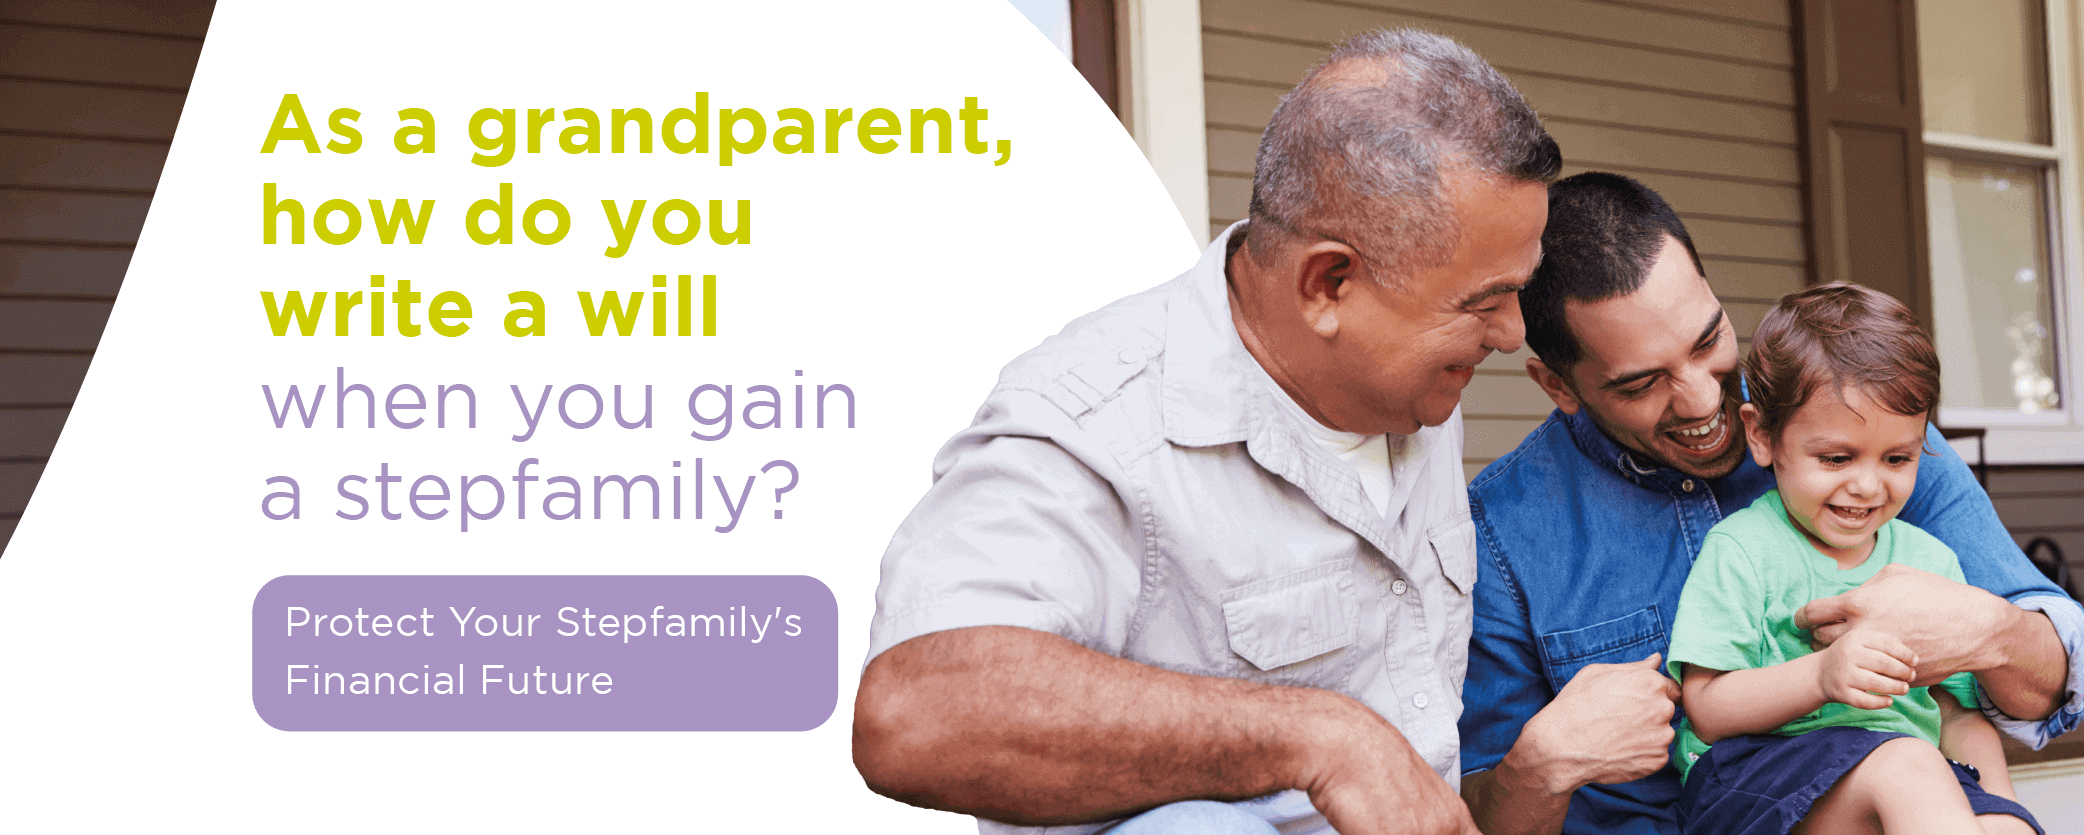 As a grandparent, how do you write a will when you gain a stepfamily?